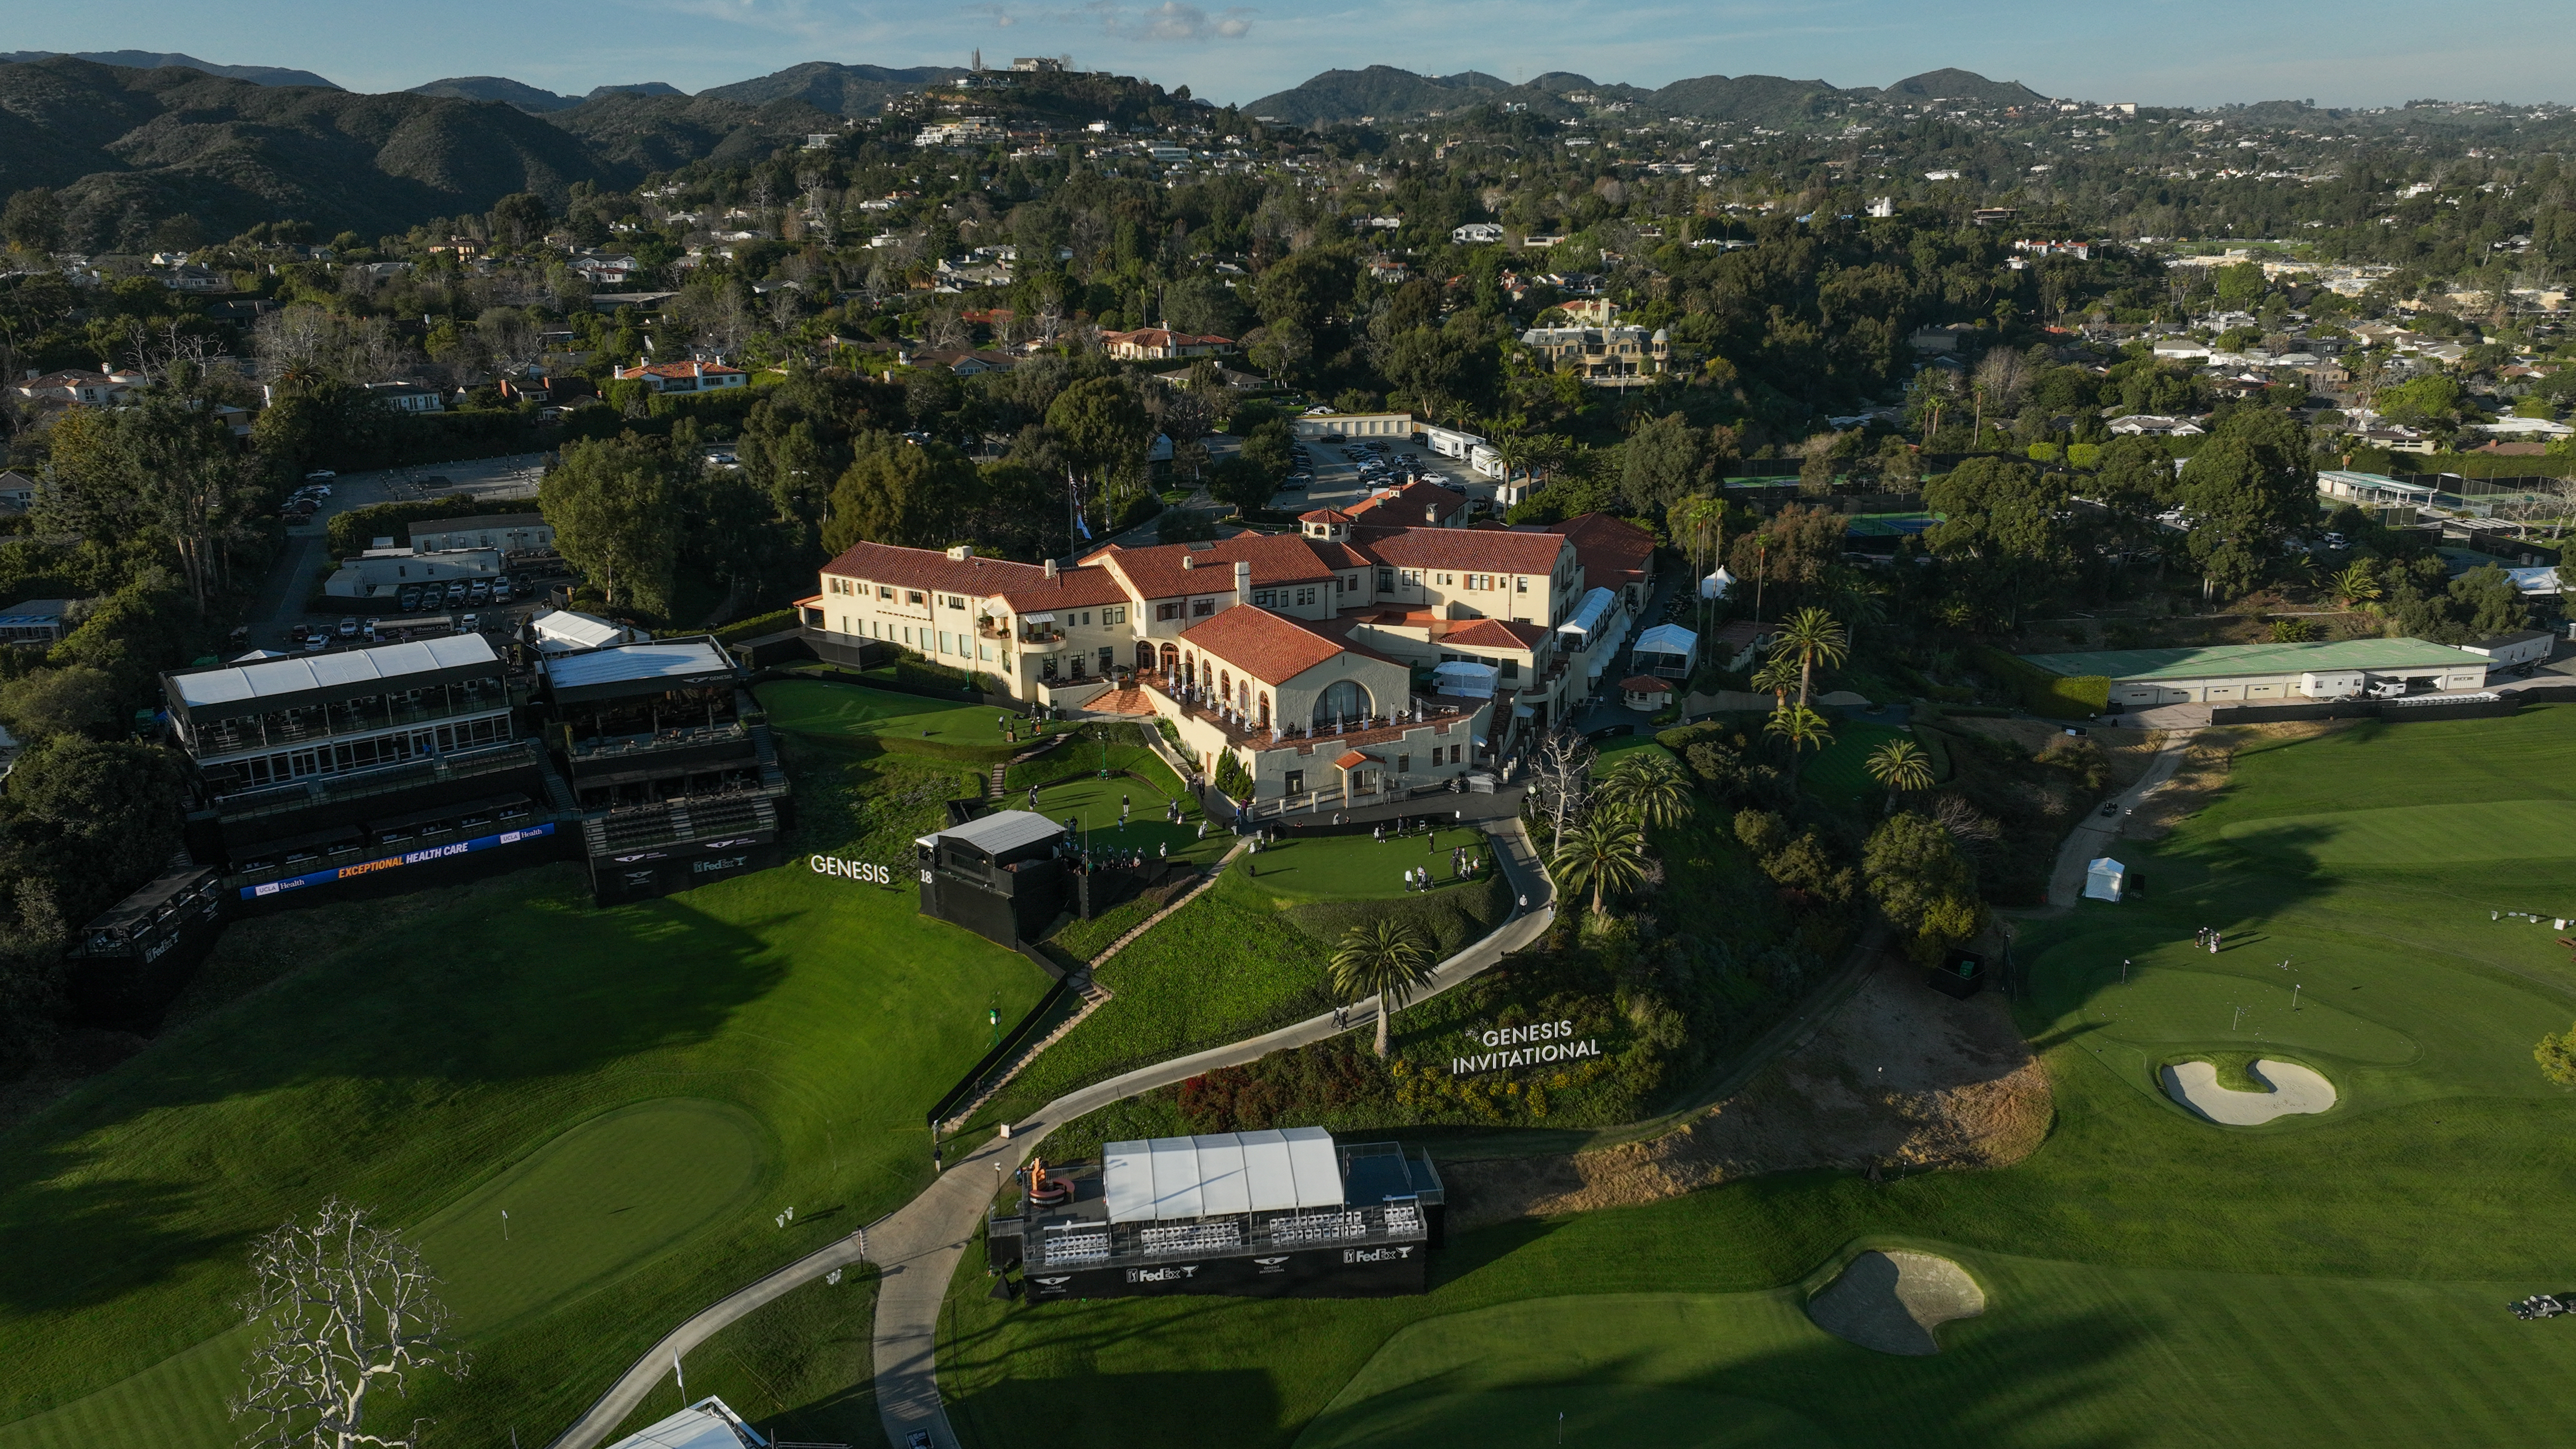 Olympic golf course for 2028 Games in Los Angeles offers an historic test